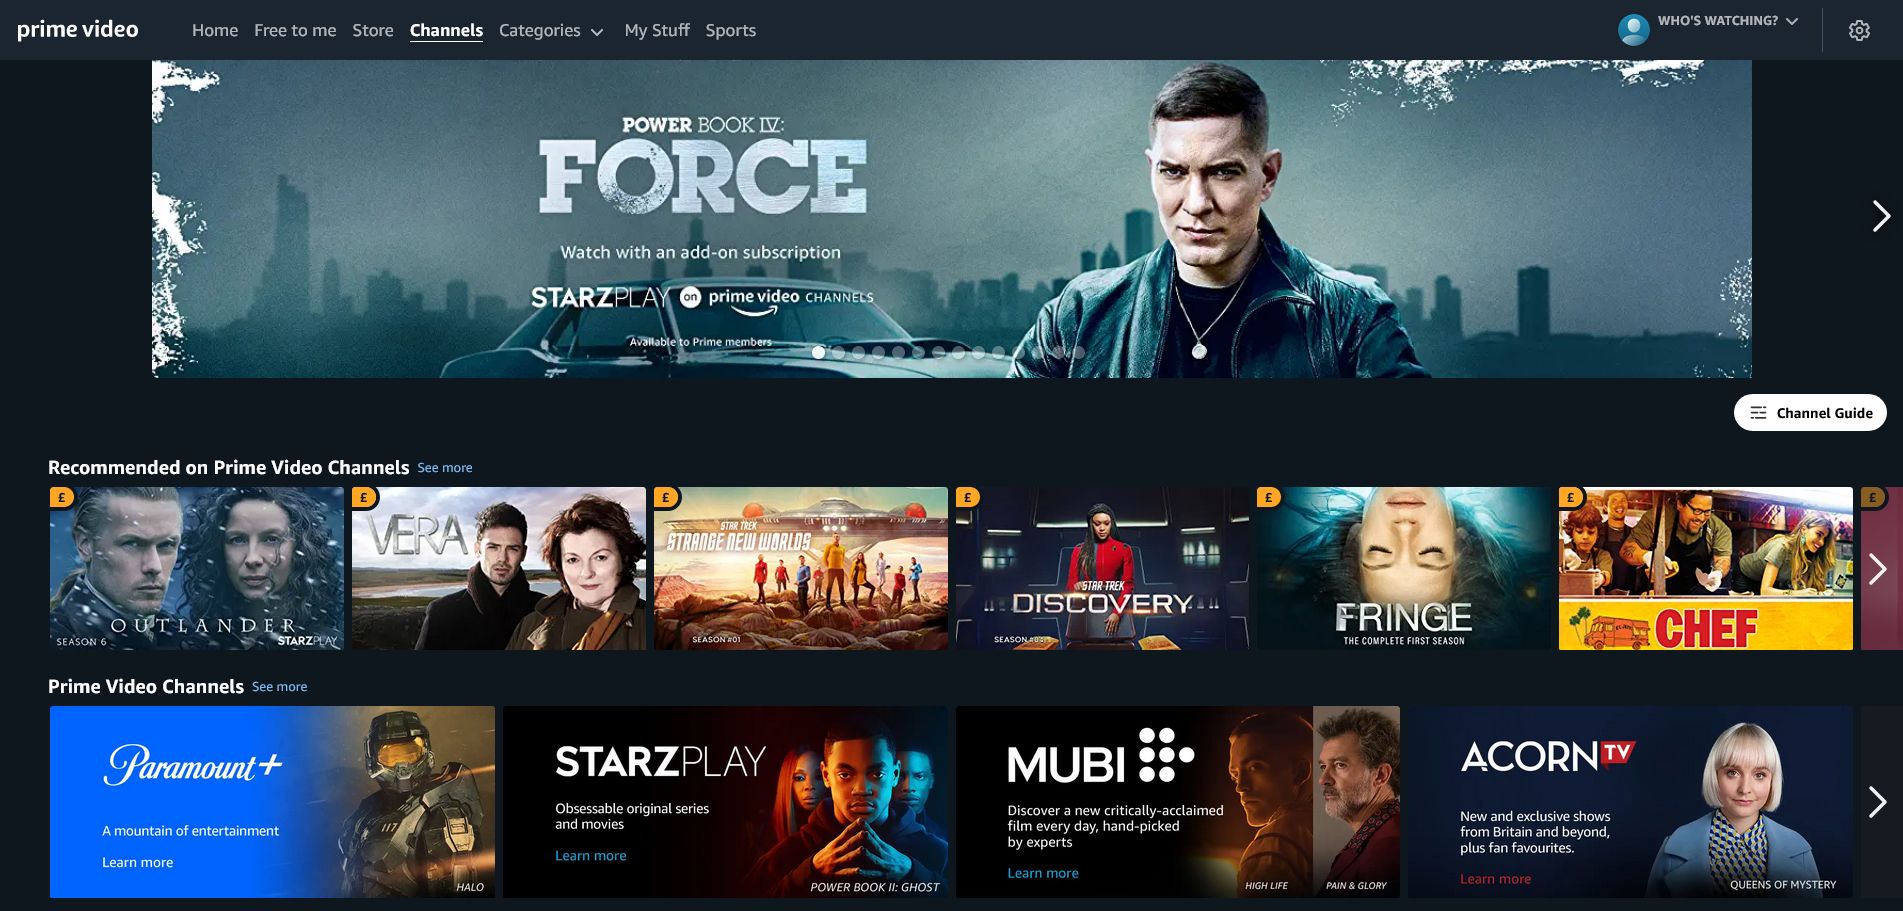 prime video channels overview